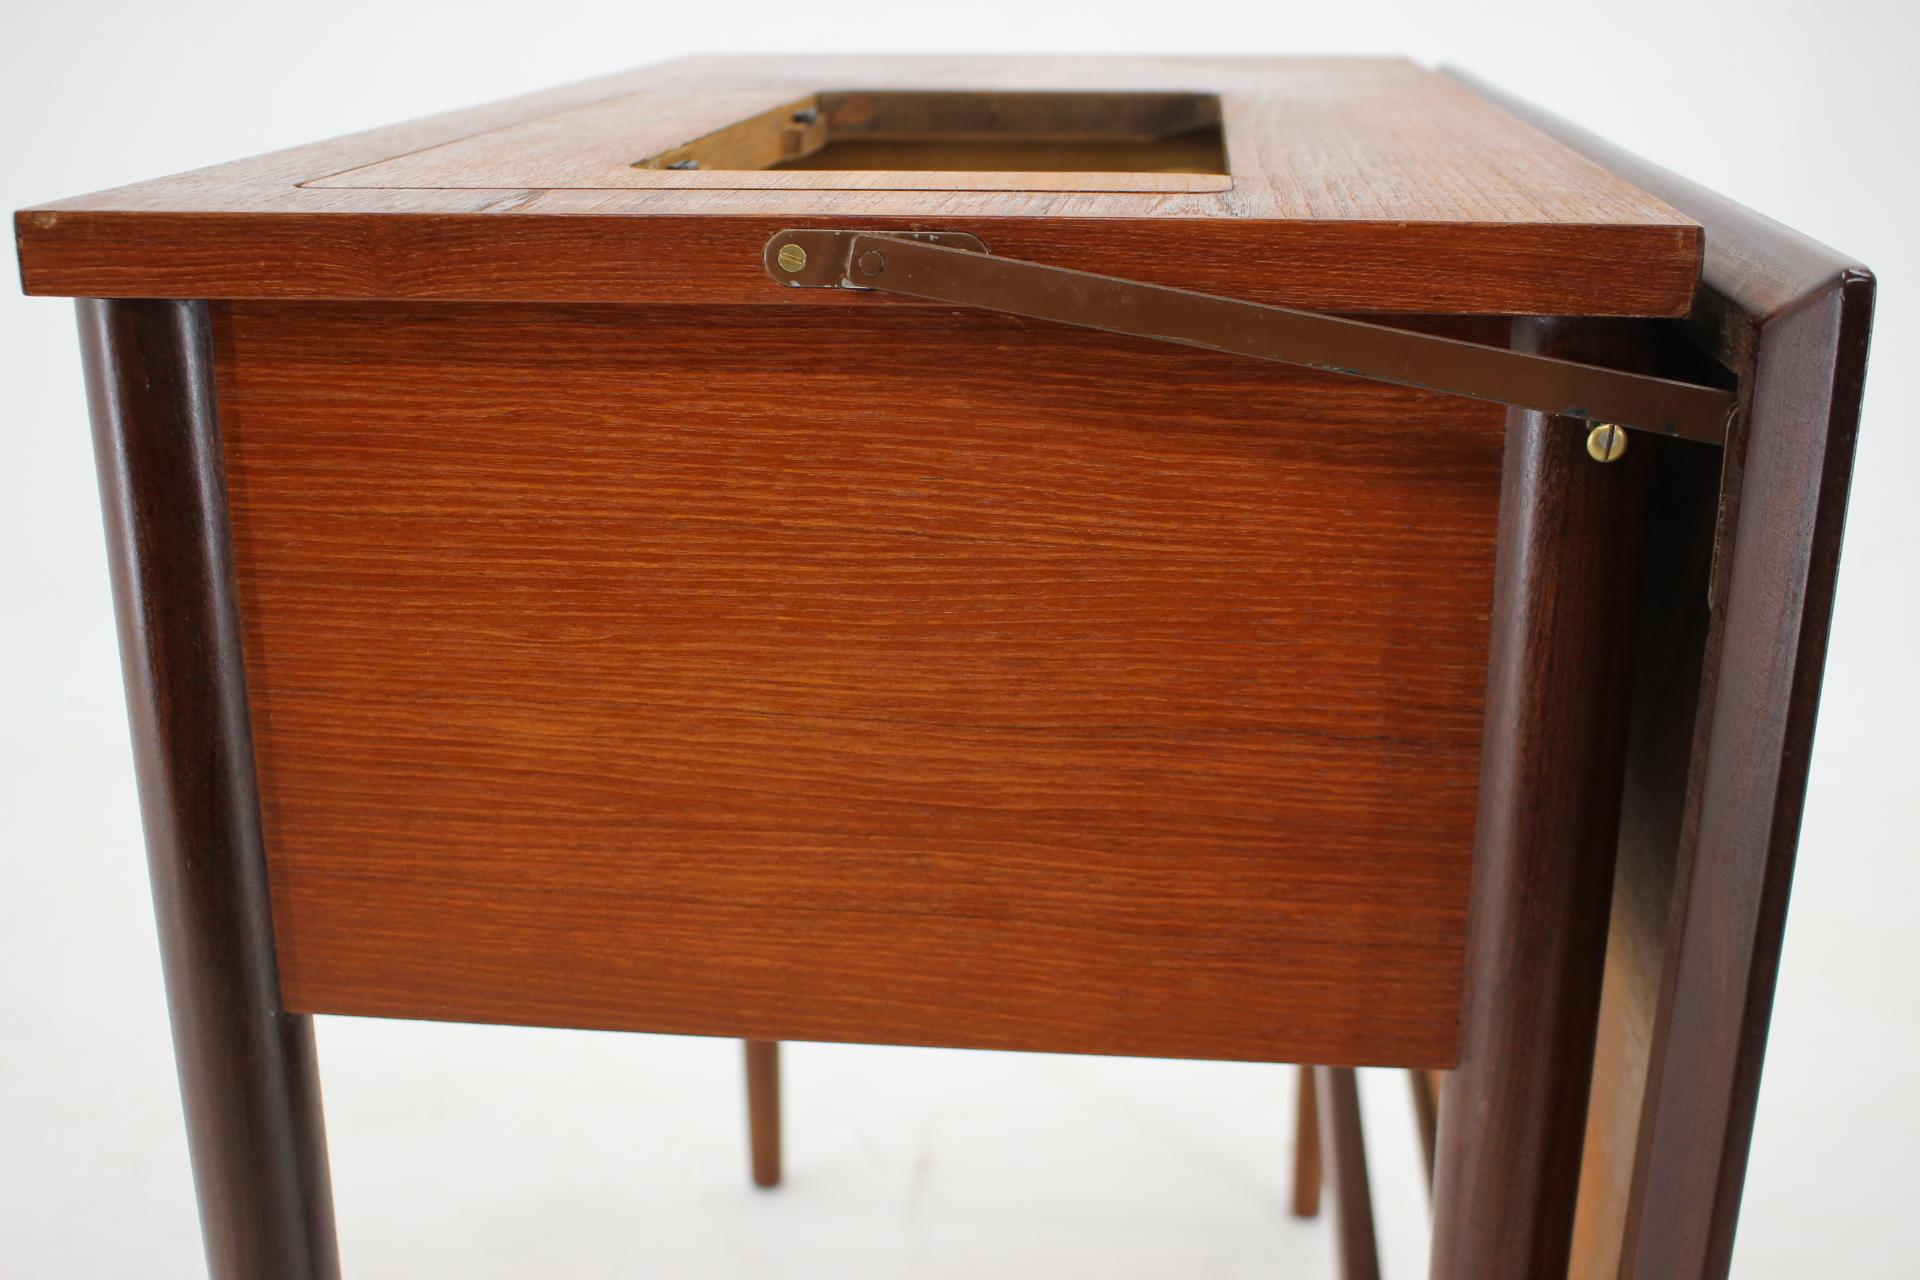 1960s Teak Sewing Table or Table with Built in Sewing Machine, Denmark For Sale 7